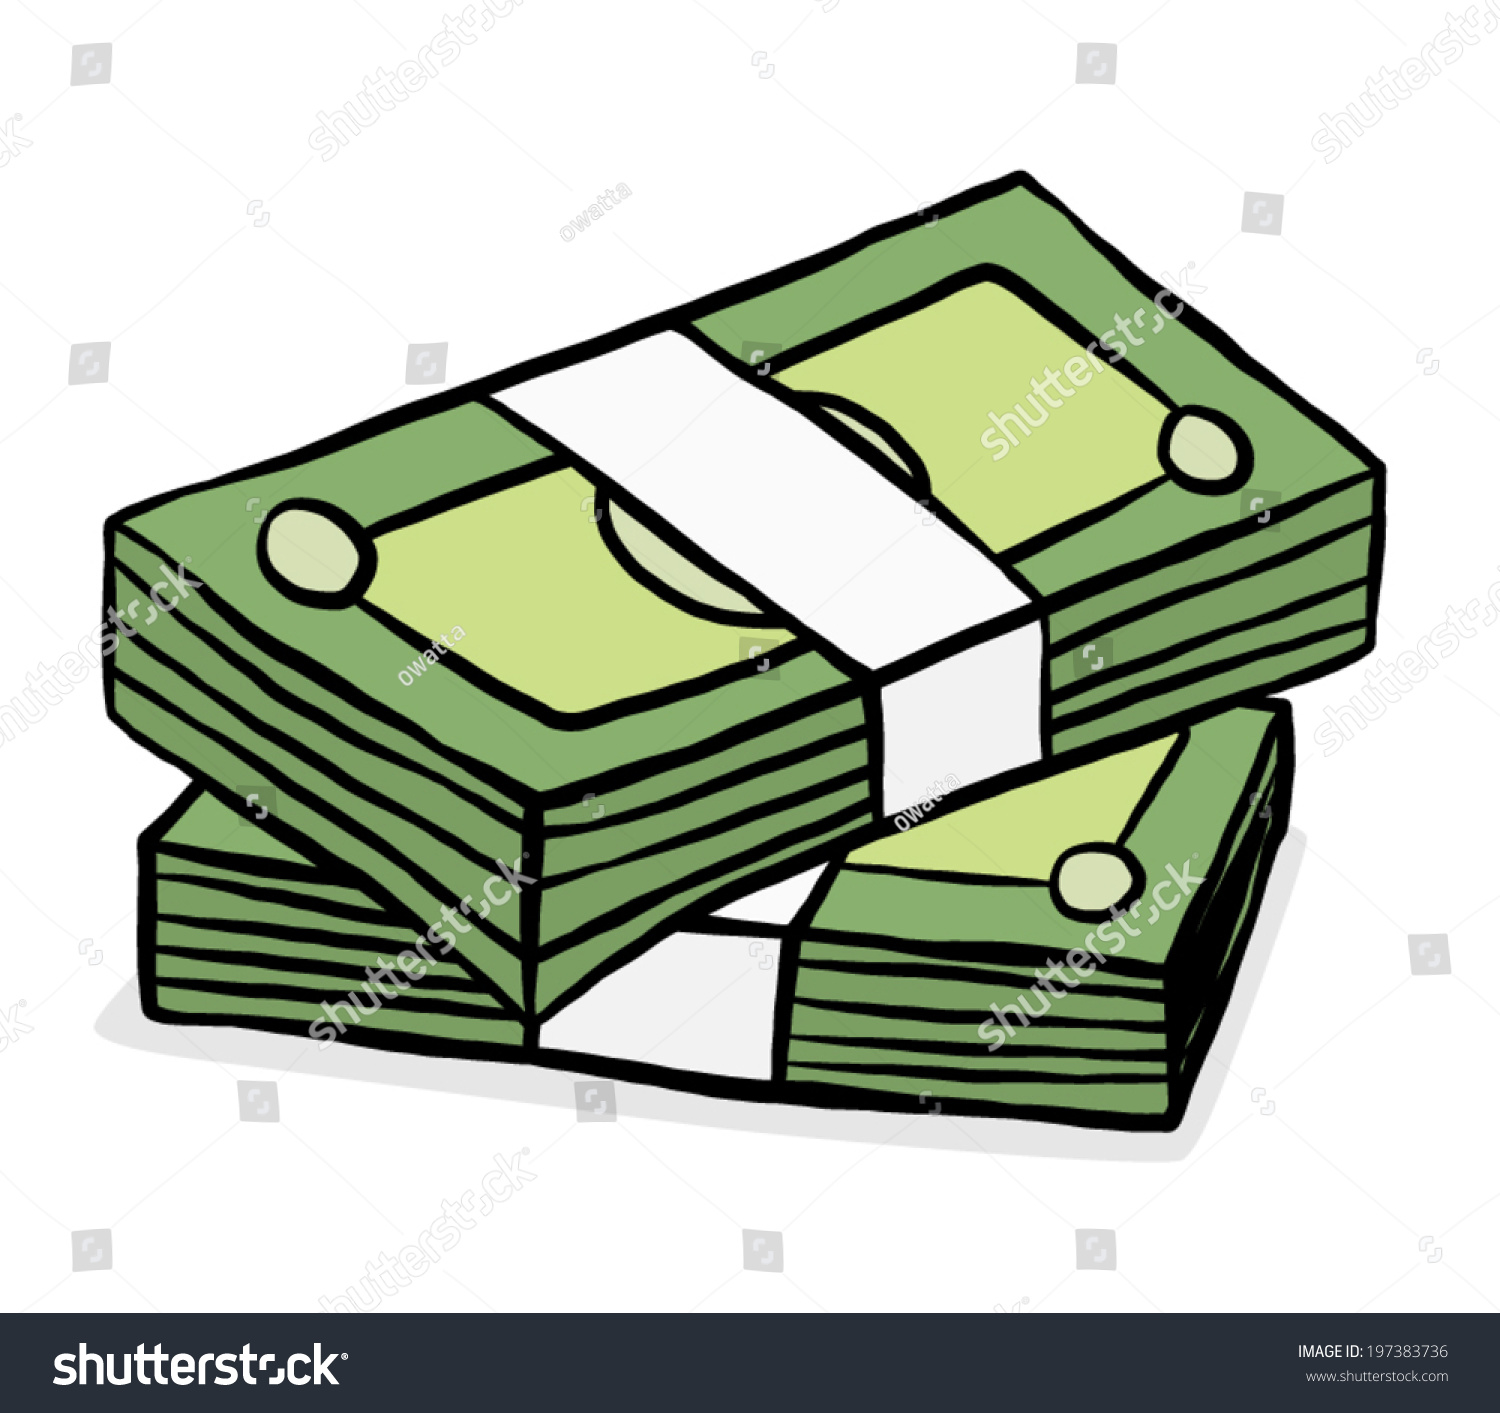 stack of money clipart - photo #40